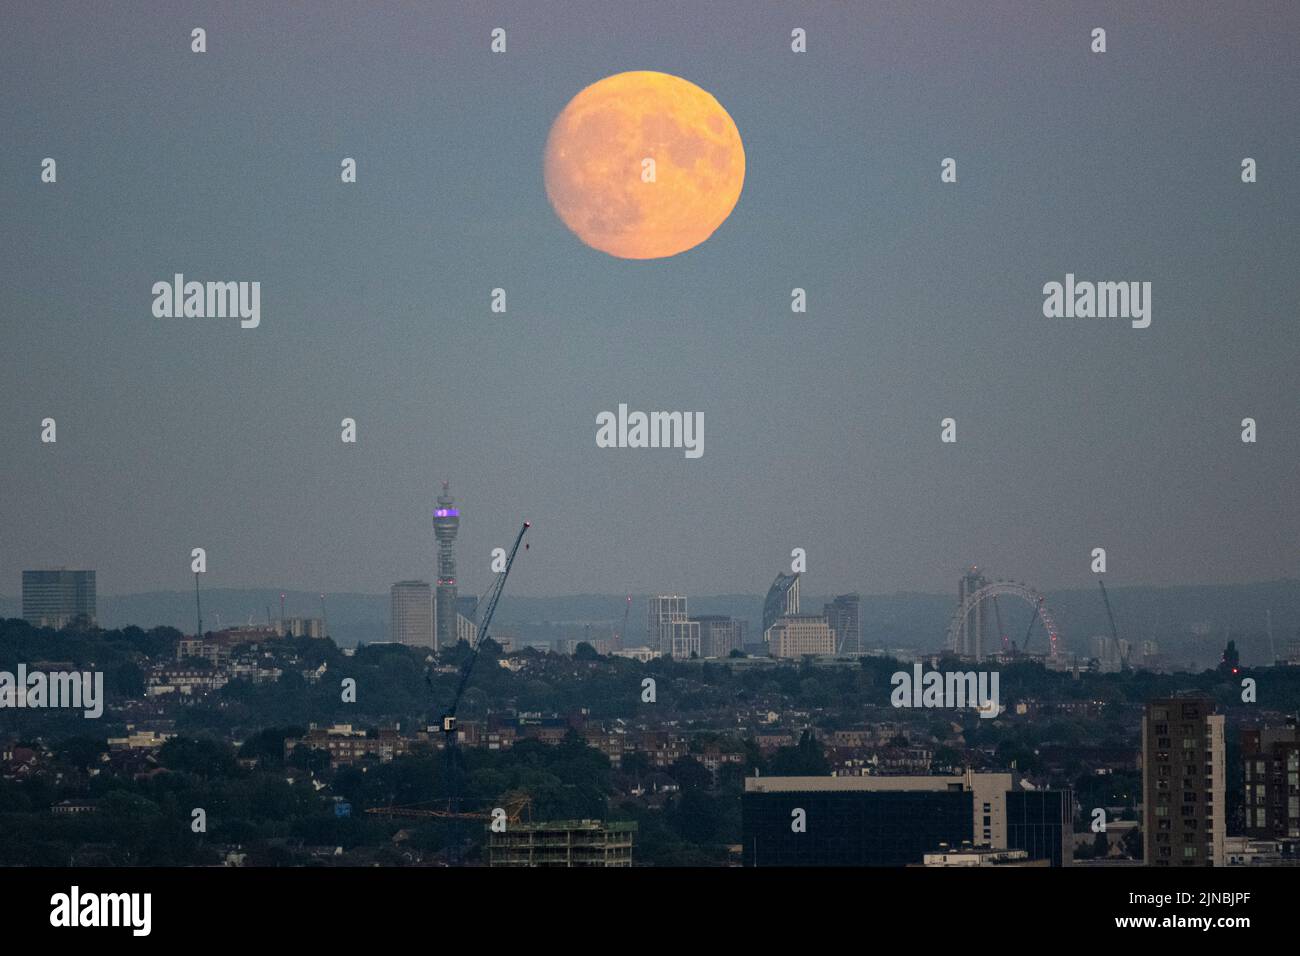 London, UK.  10 August 2022.  UK Weather – A 97.1% waxing gibbous moon rises through a layer of smog over the BT Tower and skyline of the capital.  According to The Old Farmer’s Almanac, August’s full moon (at 02:35 on 12 August) is called the Sturgeon Moon because of the large number of sturgeon fish that were found in the Great Lakes in North America at this time of year.  August’s full moon is also known as a ‘supermoon’ appearing brighter and larger as it will be at its closest point to the Earth in its orbit, known as the perigee. Credit: Stephen Chung / Alamy Live News Stock Photo